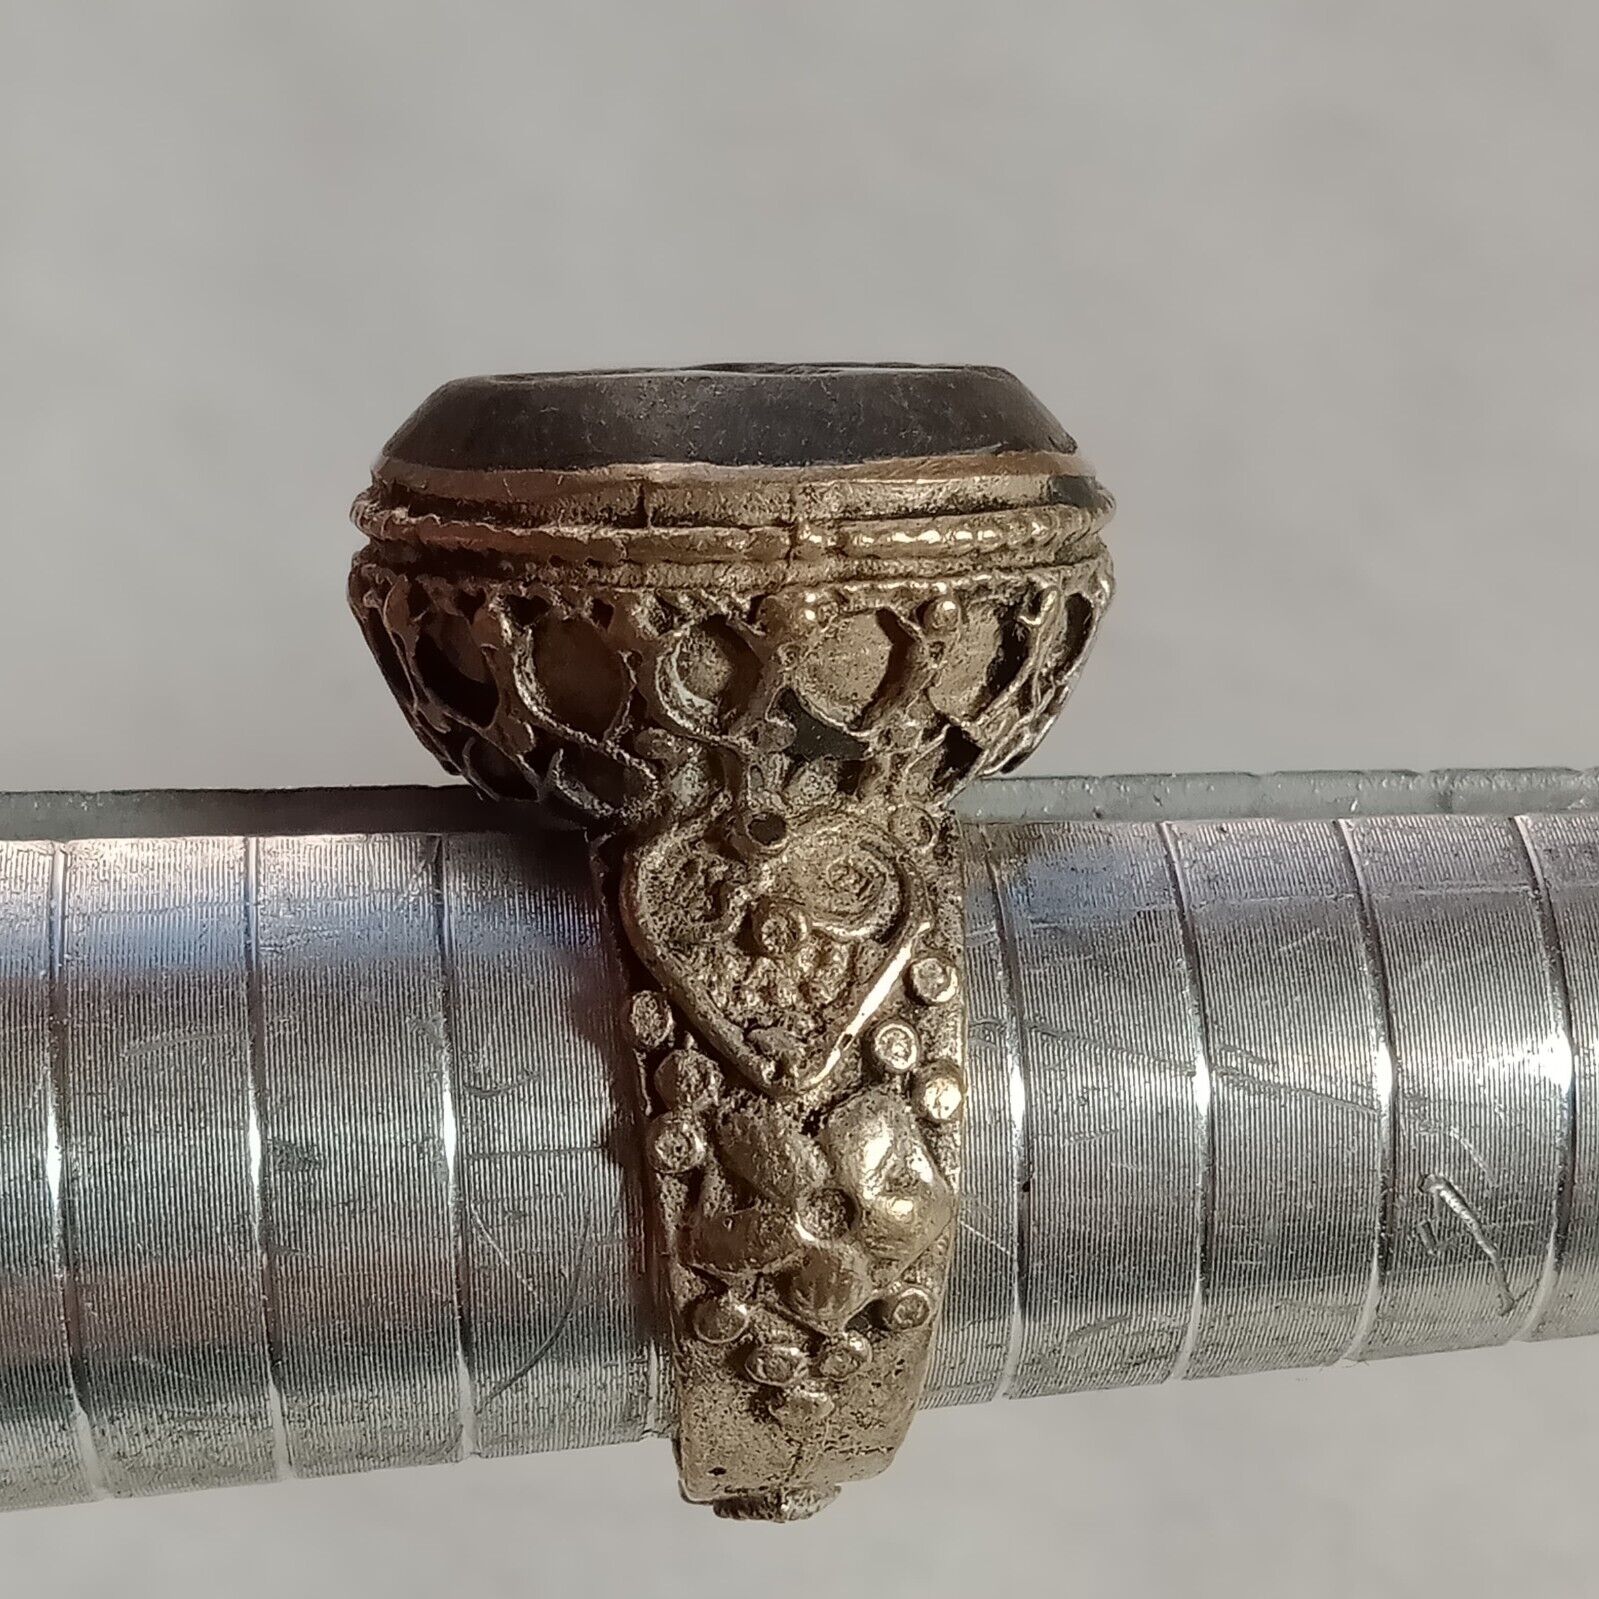 BEAUTIFUL POST MEDIEVAL ISLAMIC OLD SILVER OTTOMANS SEAL RING BLACK STONE